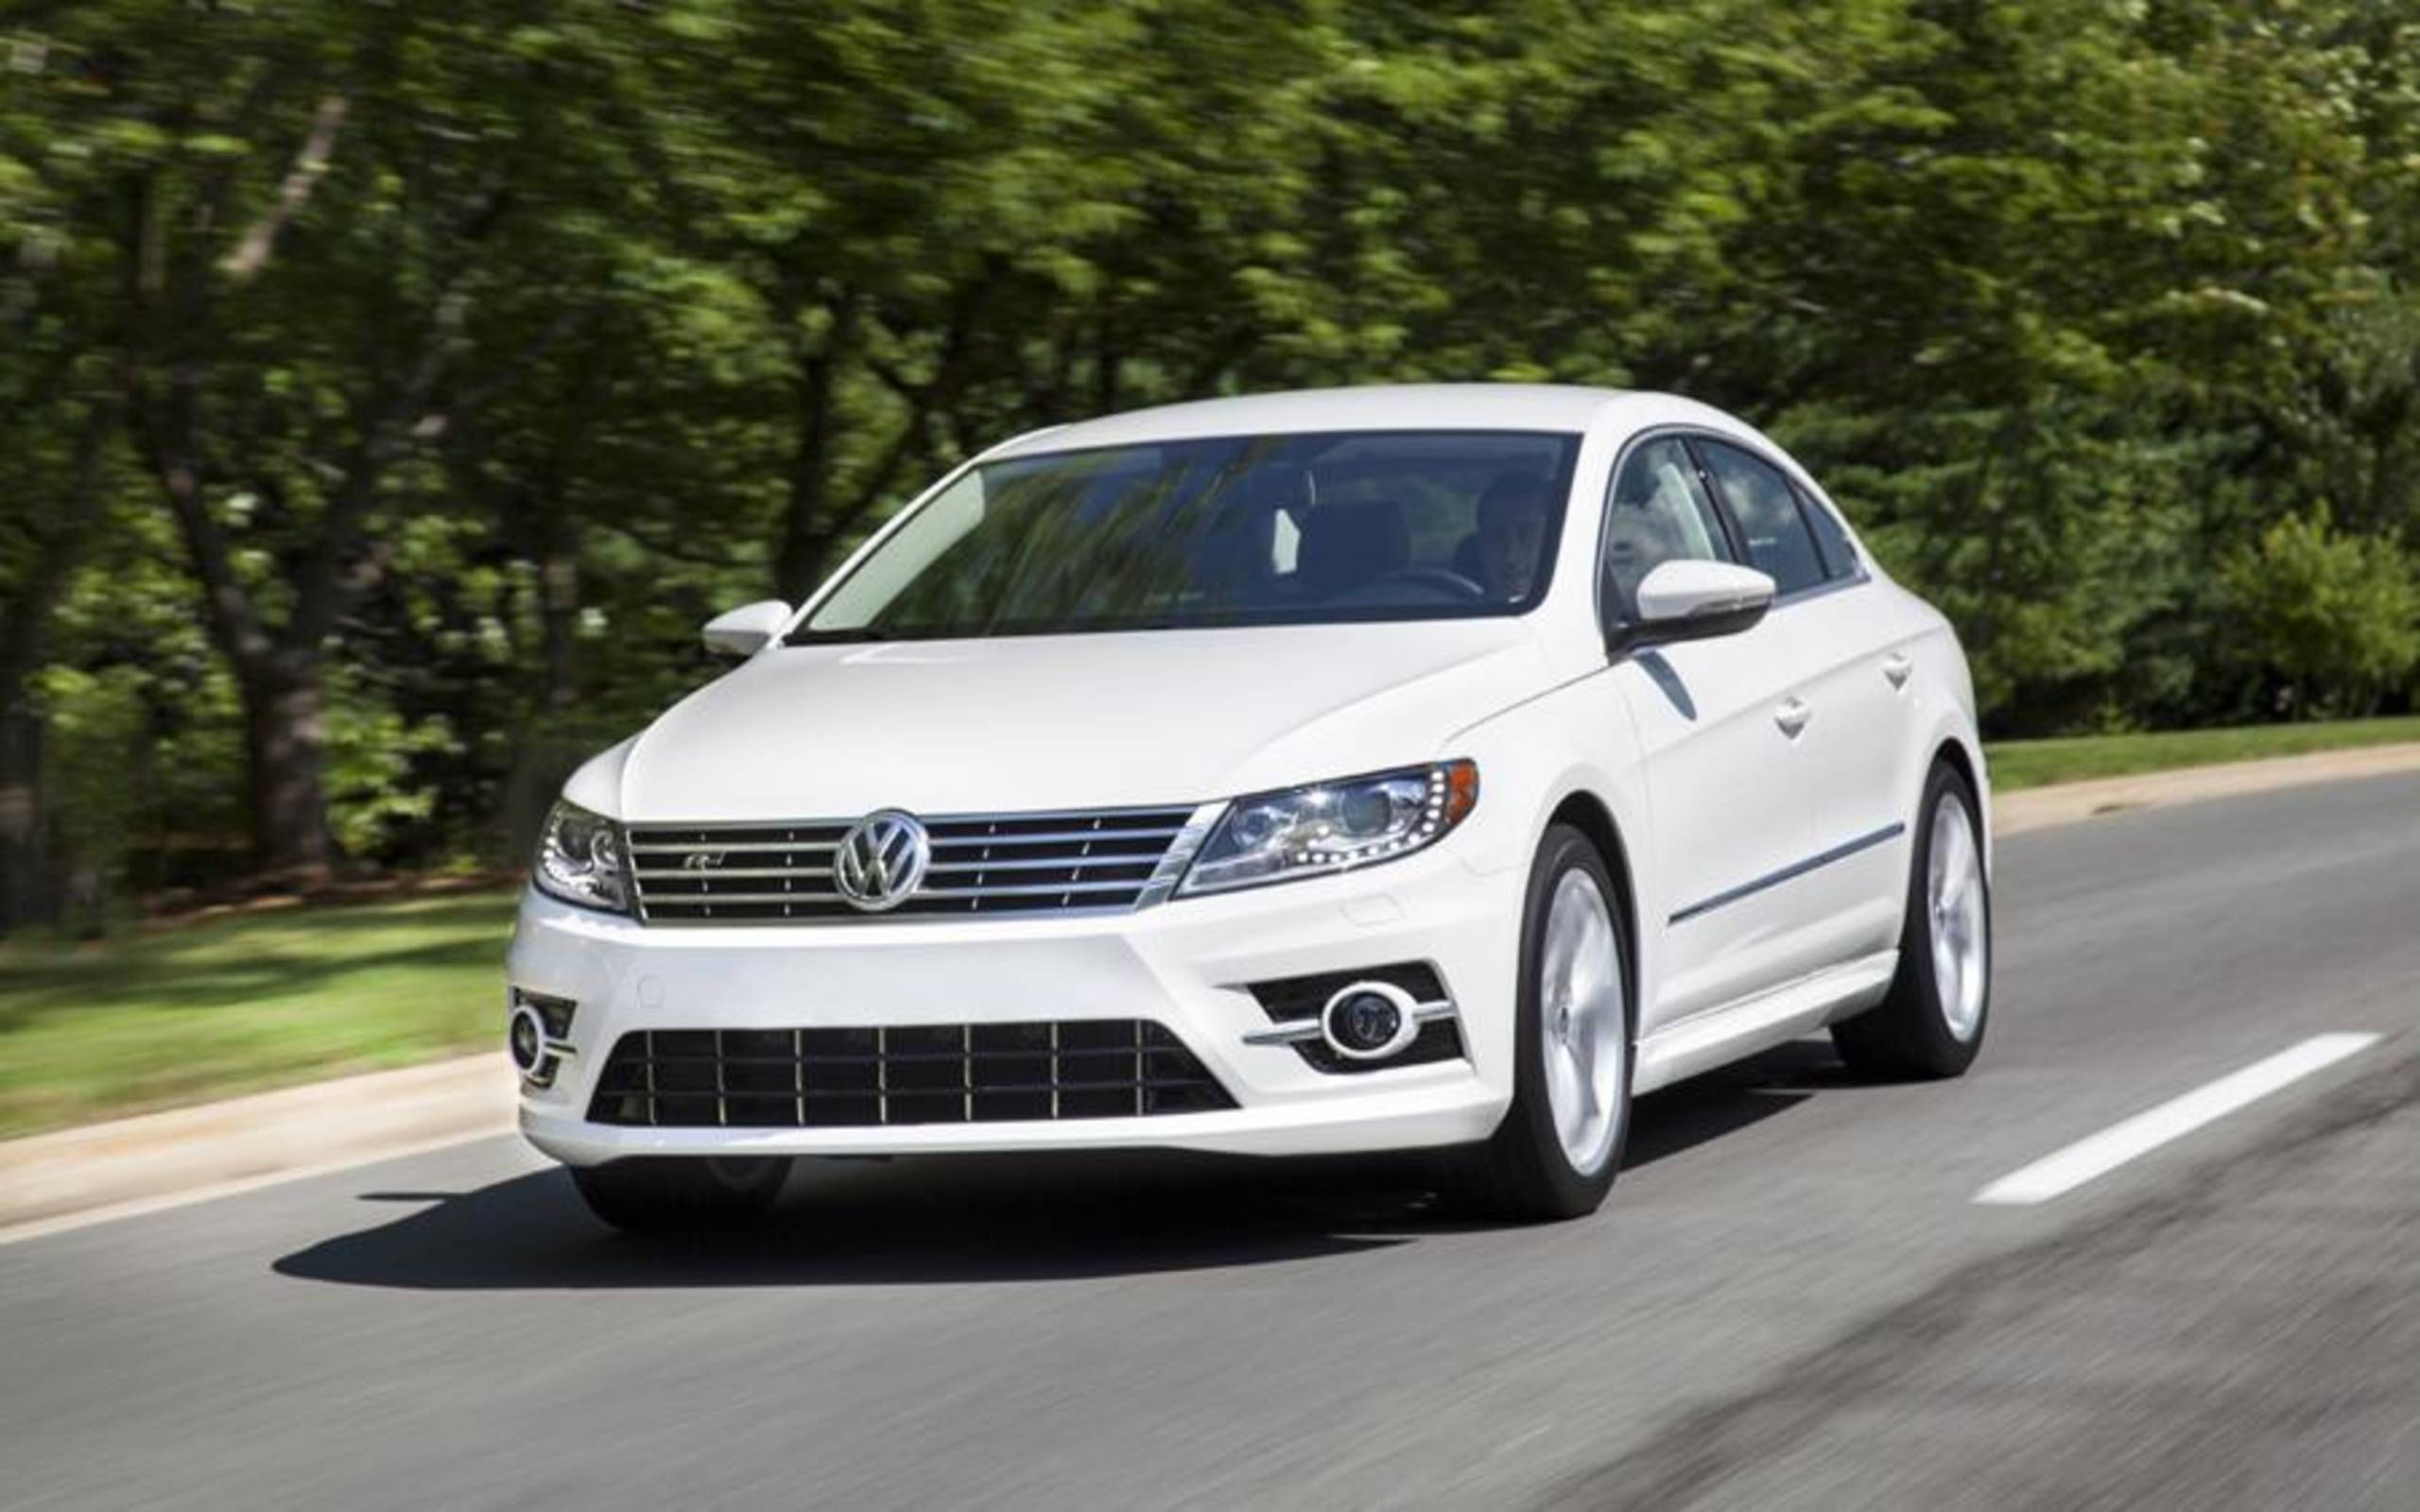 2014 Volkswagen CC R-Line review notes